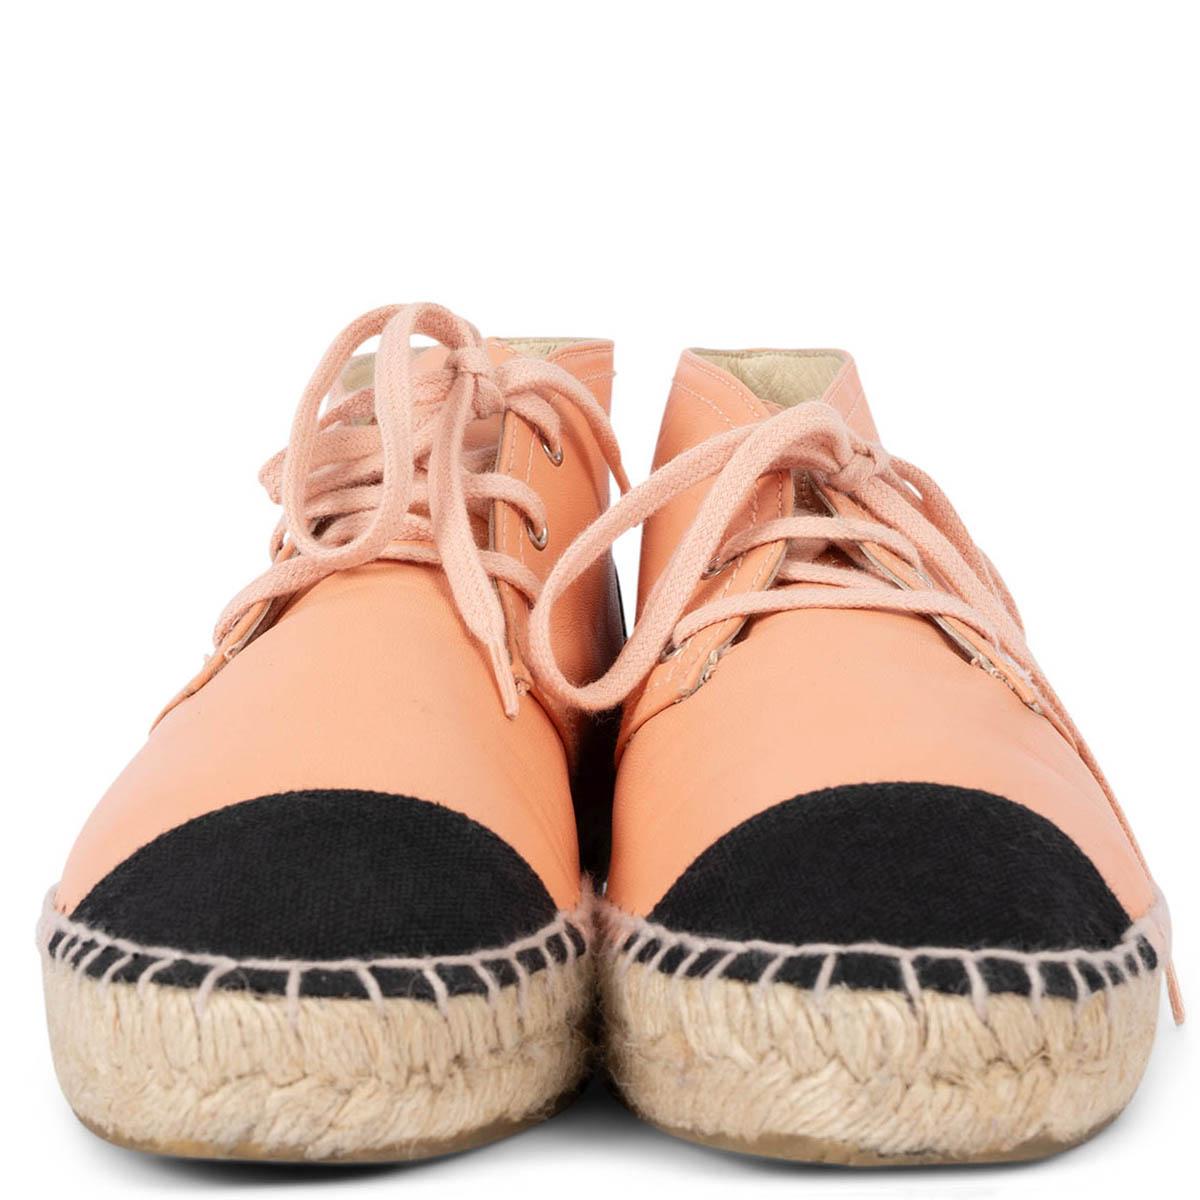 100% authentic Chanel high-top espadrilles in smooth salmon pink lambskin with black canvas heel and cap-toe. Have been worn once or twice and are in excellent condition. 

2015 Paris-Dubai Resort

Measurements
Model	15C G29600
Imprinted